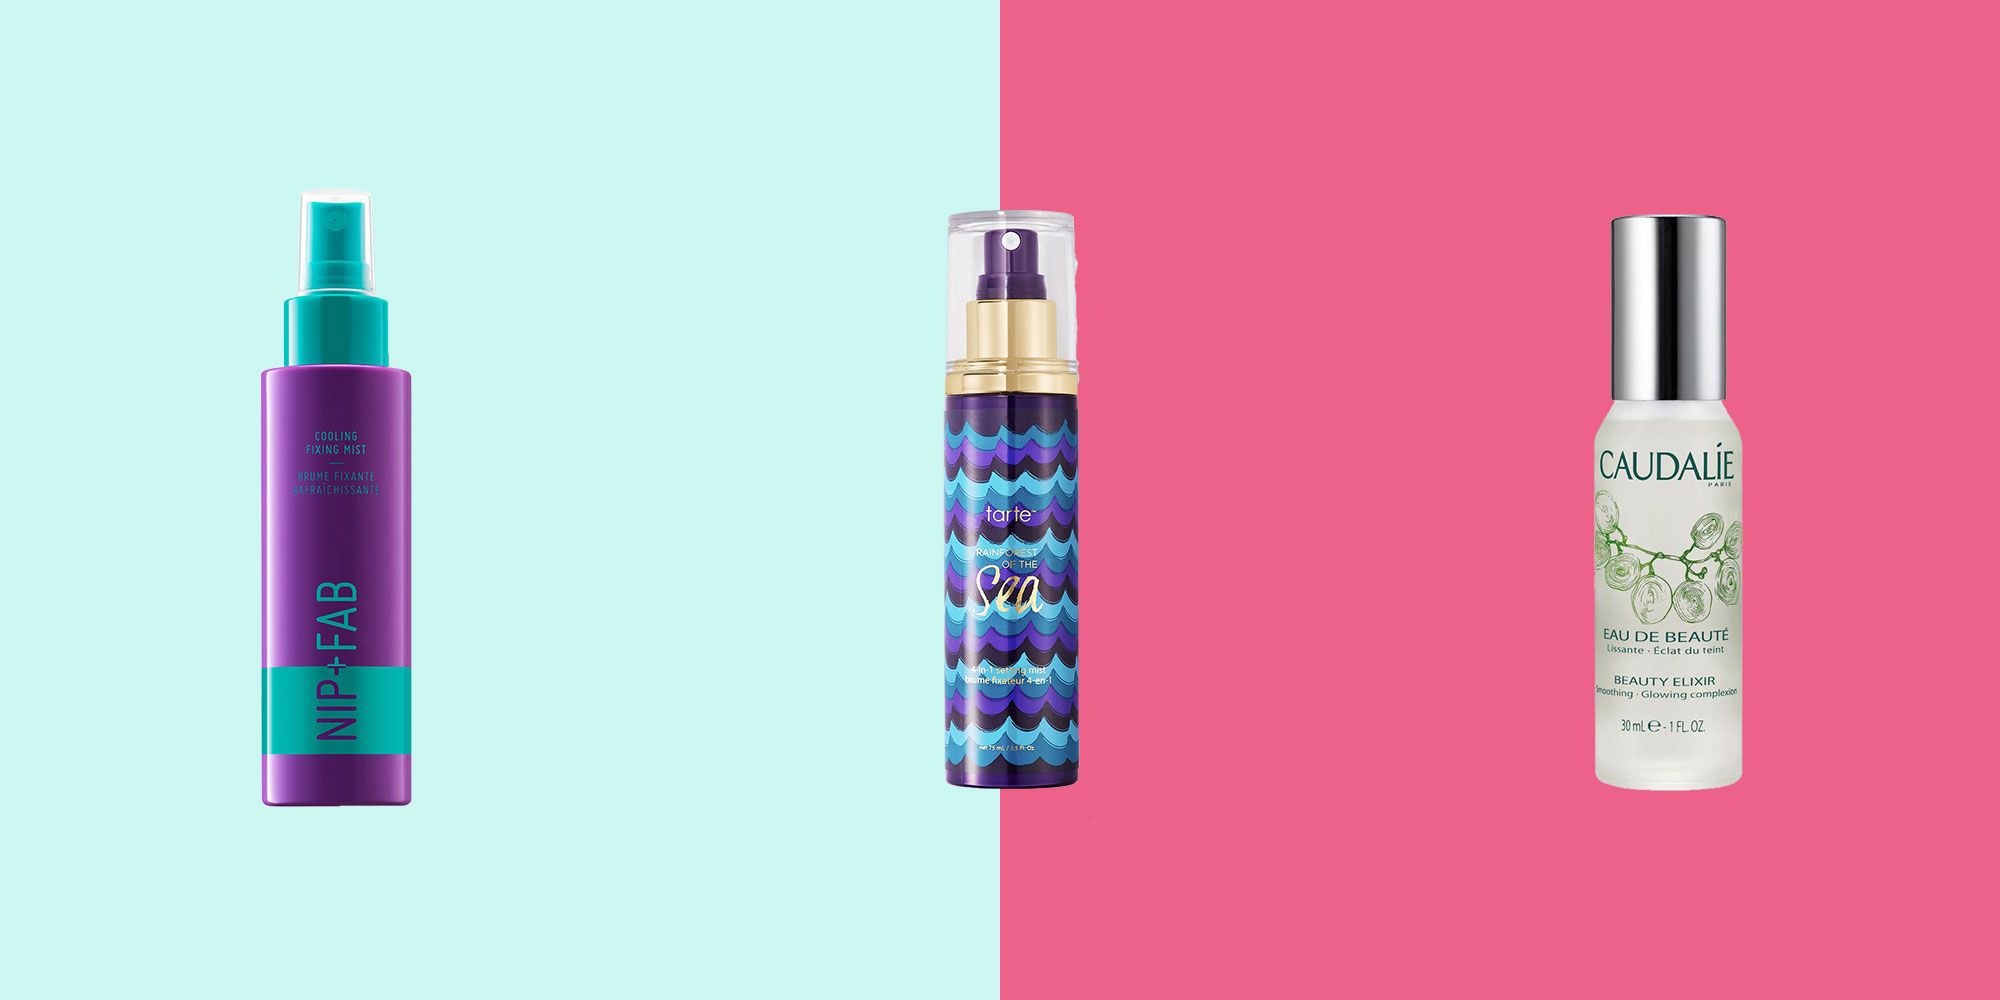 Make Up For Ever Mist And Fix O2 Makeup Setting Spray: For all day fresh  makeup!